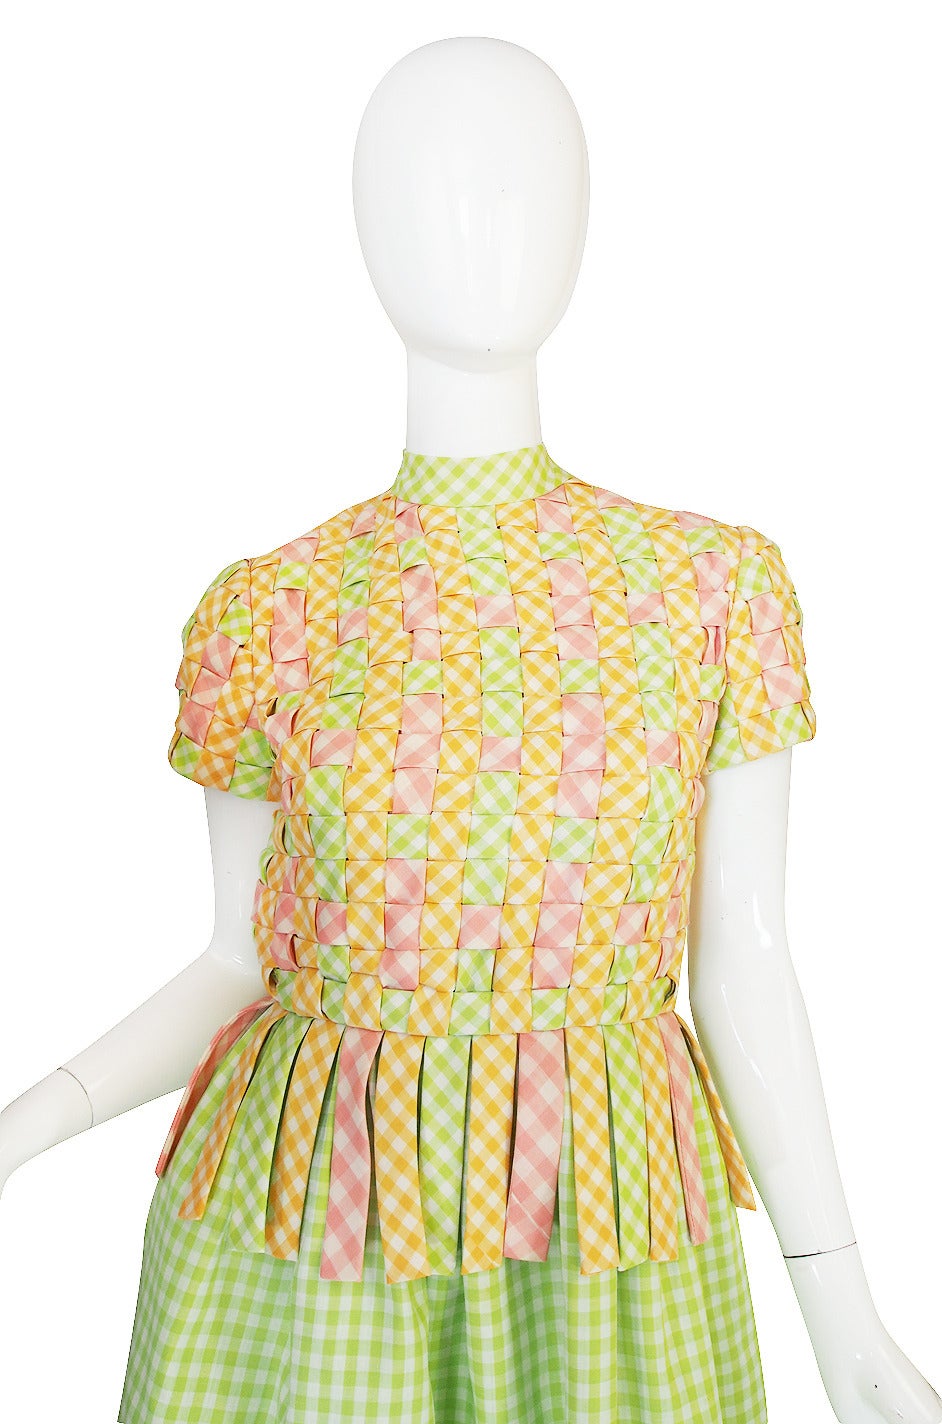 1960s Woven Front Gingham Donald Brooks Dress In Excellent Condition For Sale In Rockwood, ON